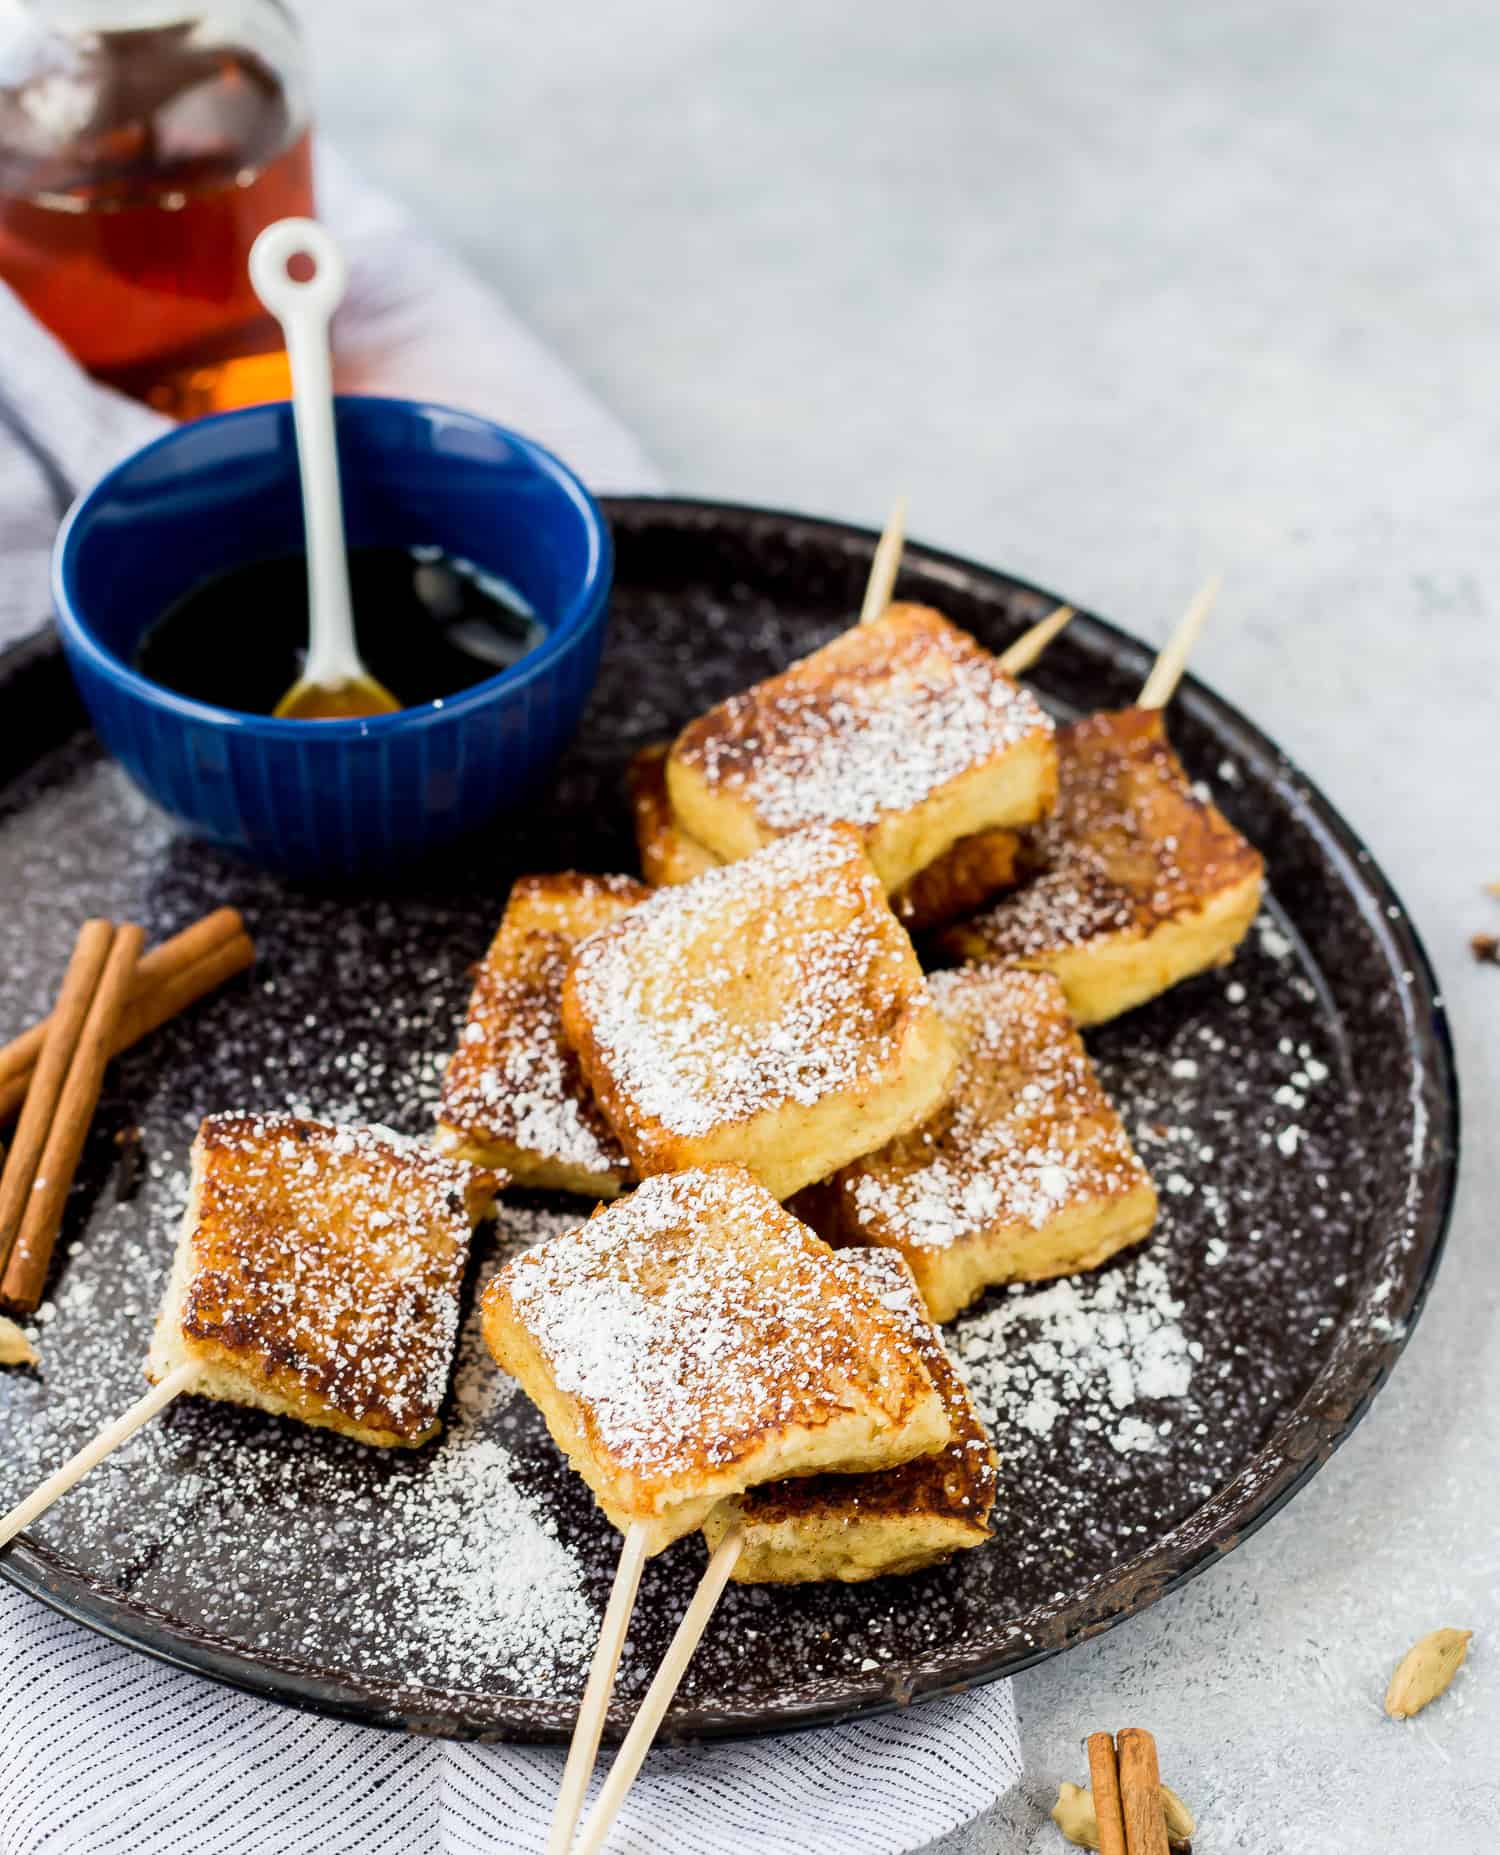 French toast skewers sprinkled with powdered sugar, maple syrup on the side.